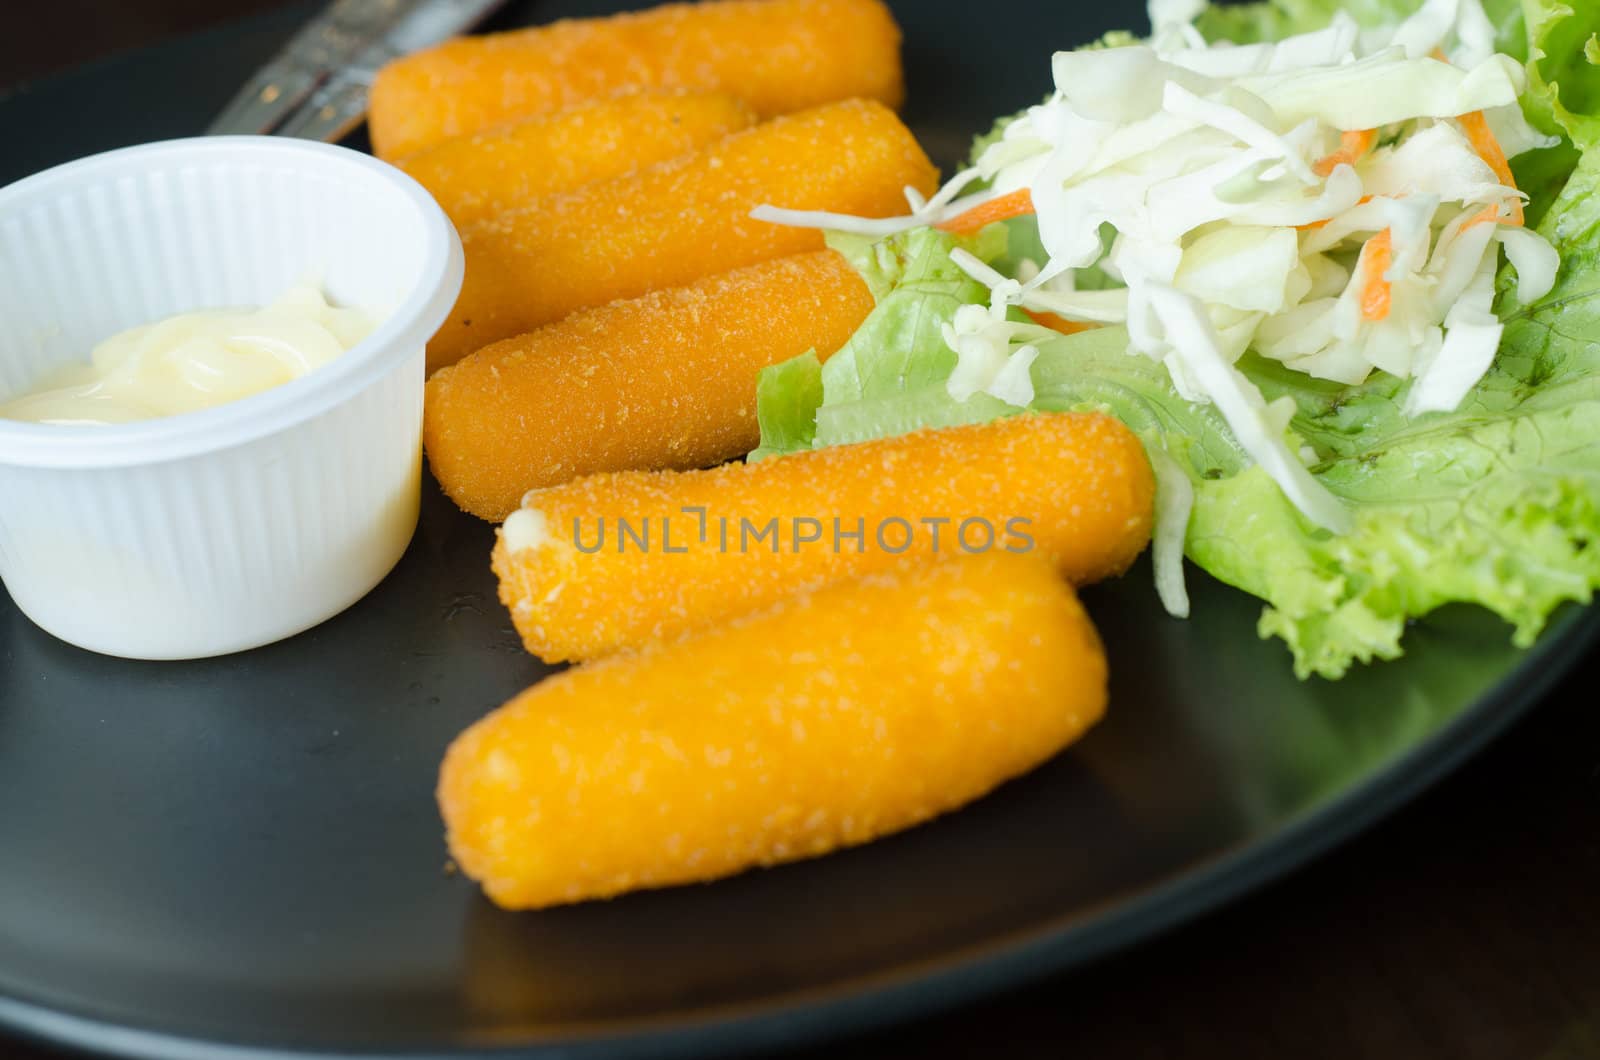 fried cheese with mustard served on dish by ngarare